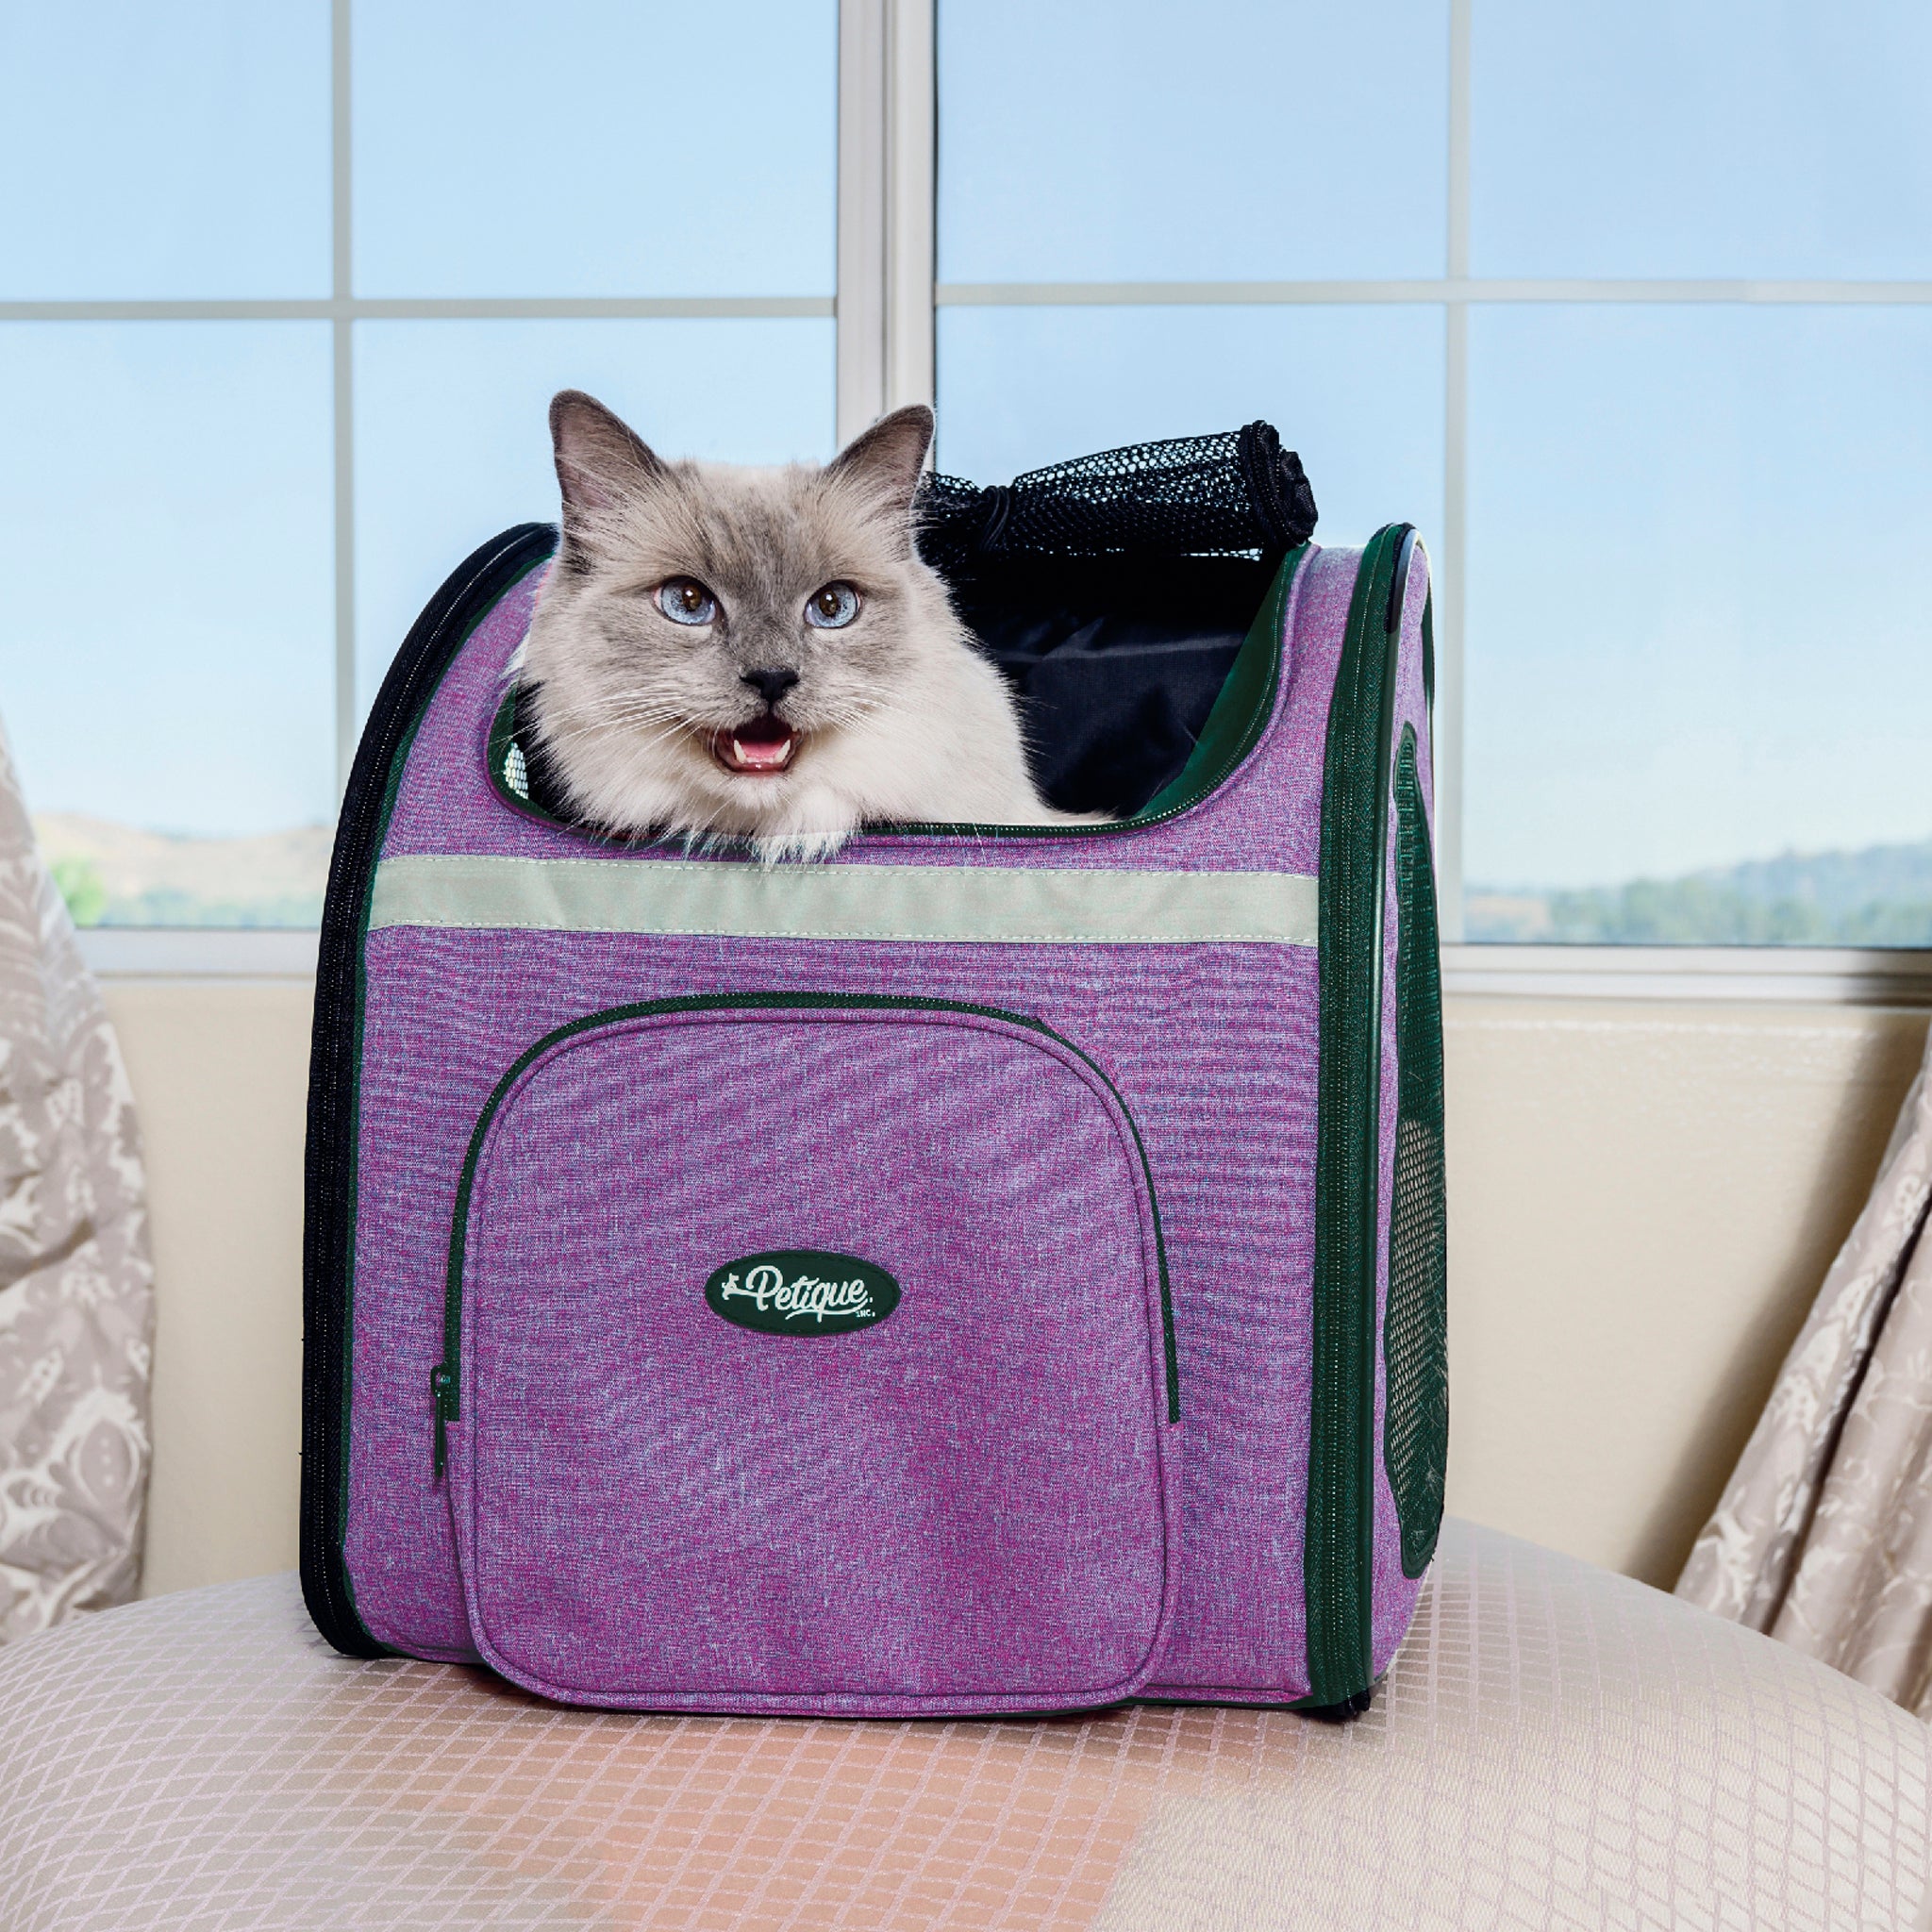 Petique The Lux Pet Carrier for dogs, cats, small animals